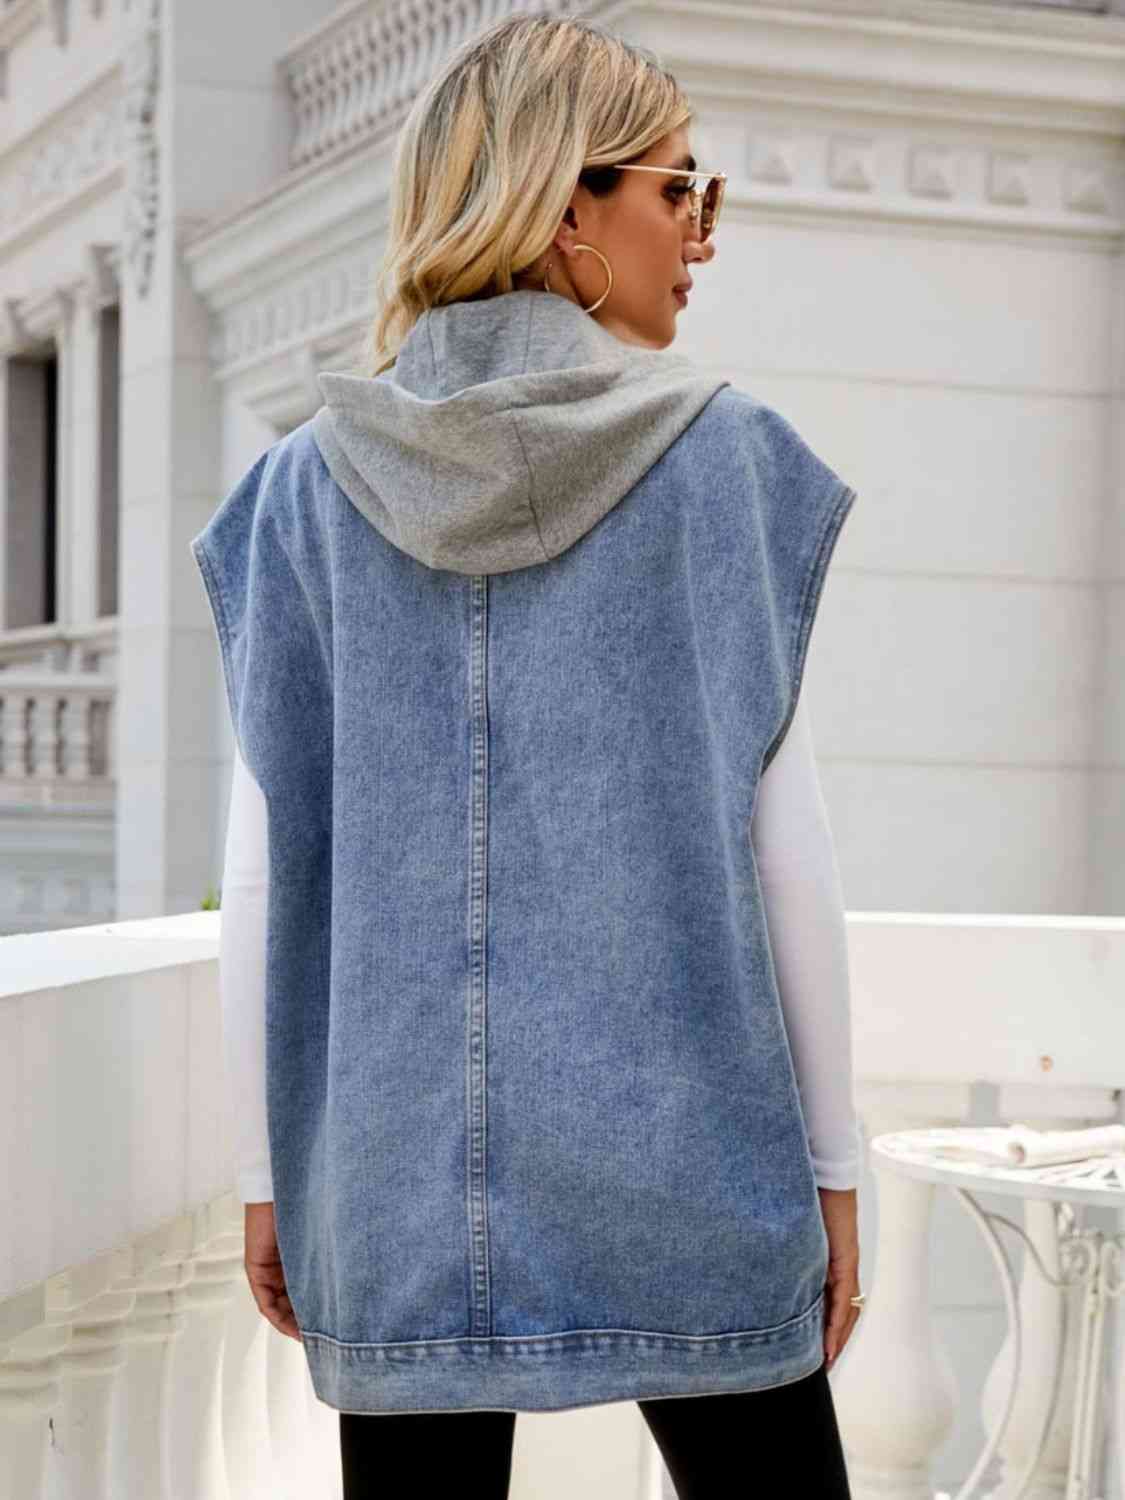 Hooded Sleeveless Denim Top with Pockets   